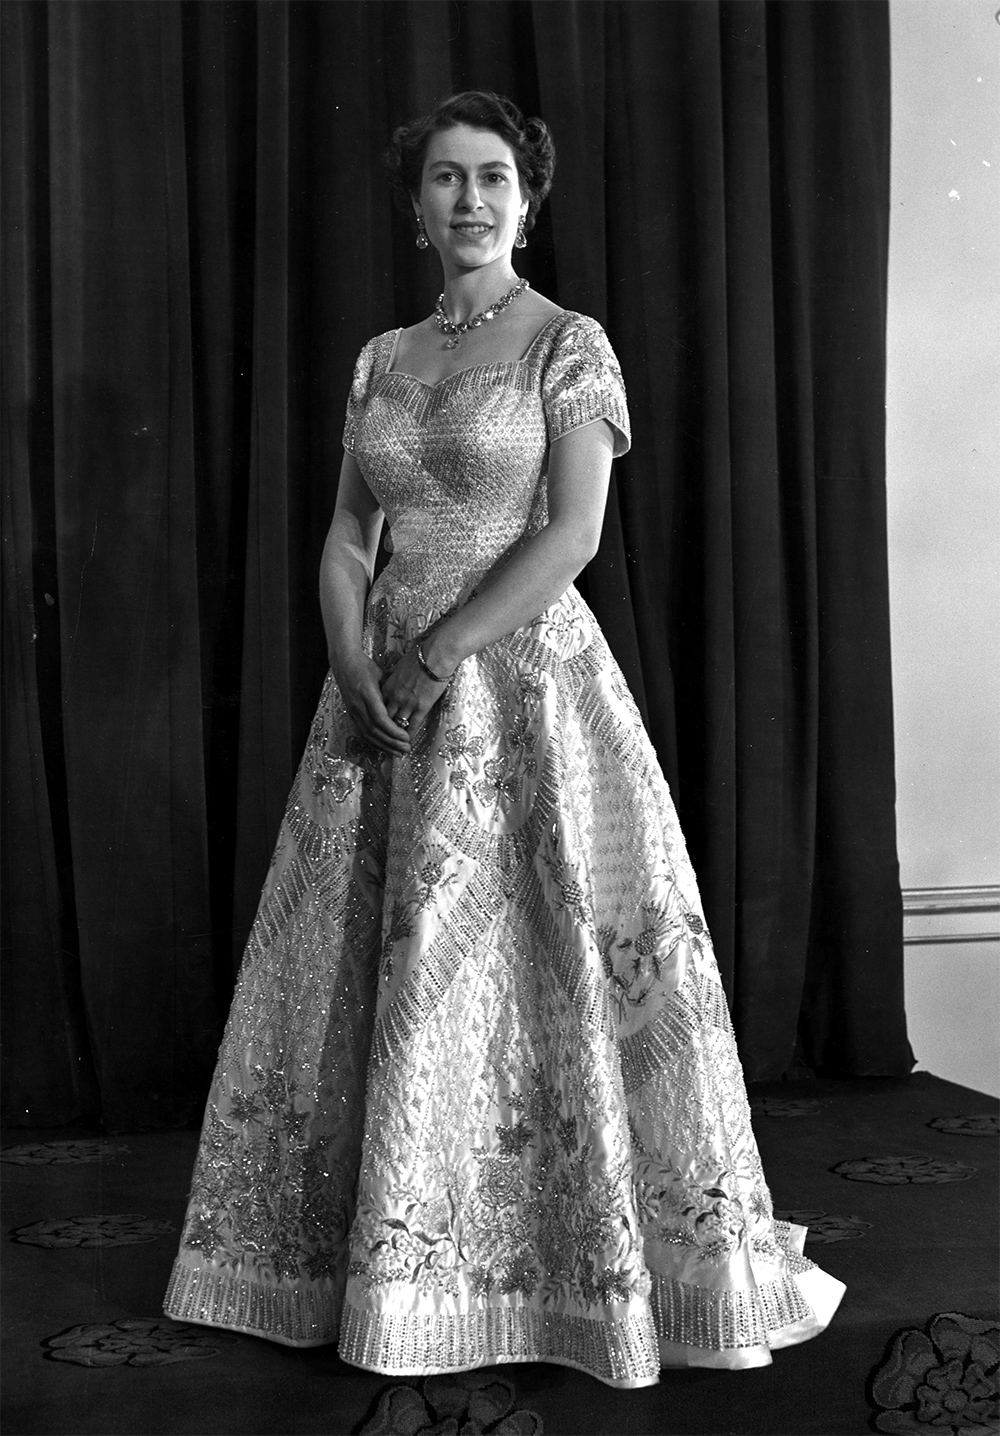 Queen Elizabeth II wearing a gown designed by Norman Hartnell for her Coronation ceremony on 2 June 1953. Photo / Getty Images